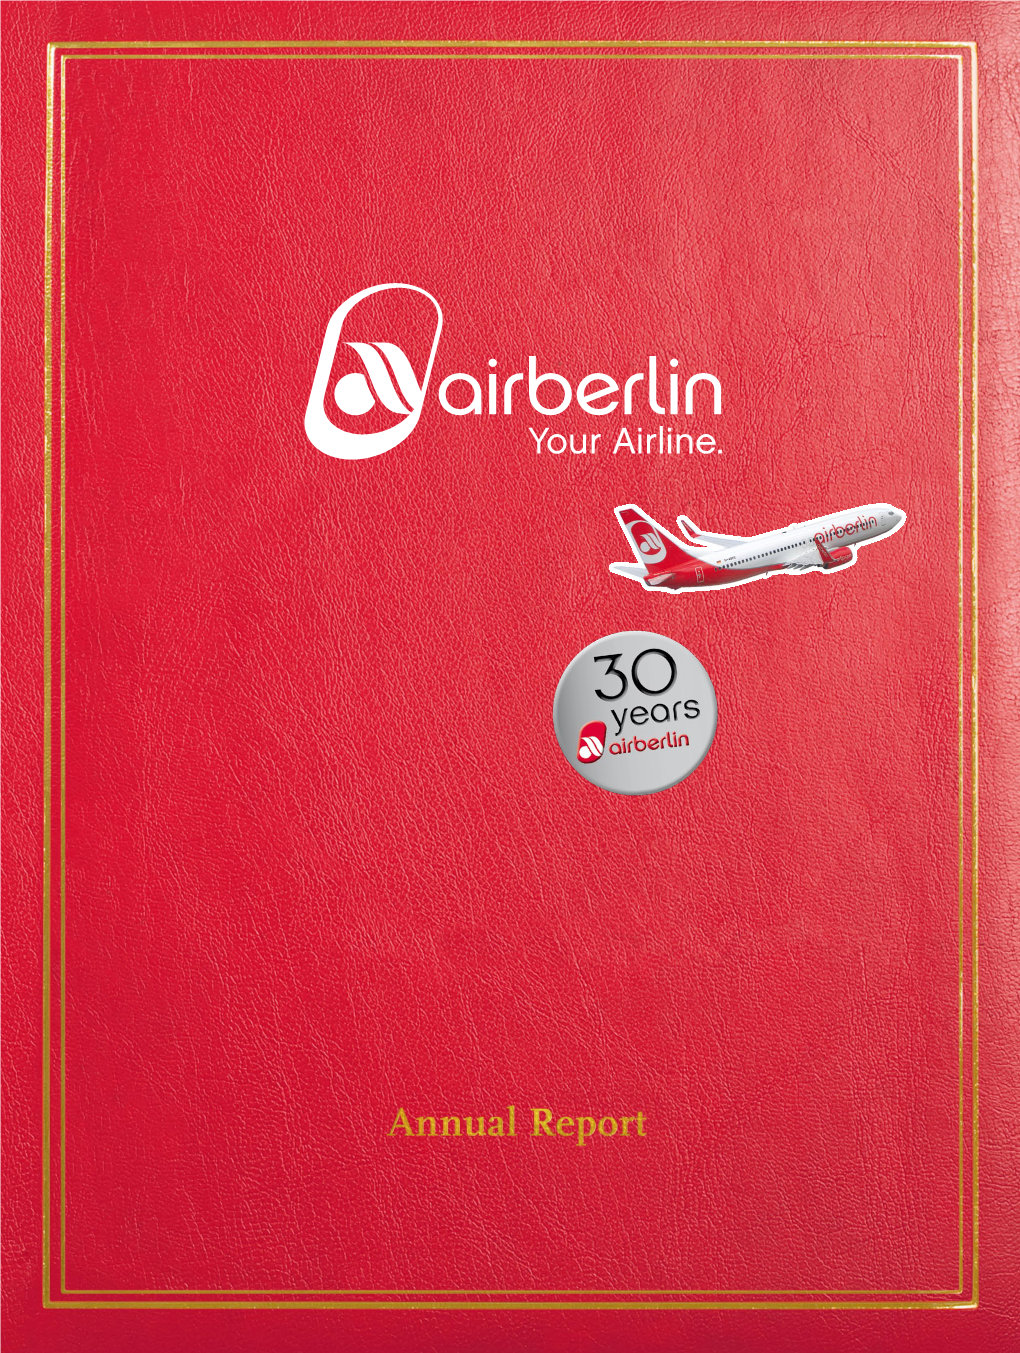 30 Years of Air Berlin! from Berlin Into the World: That’S Our History in a Nutshell